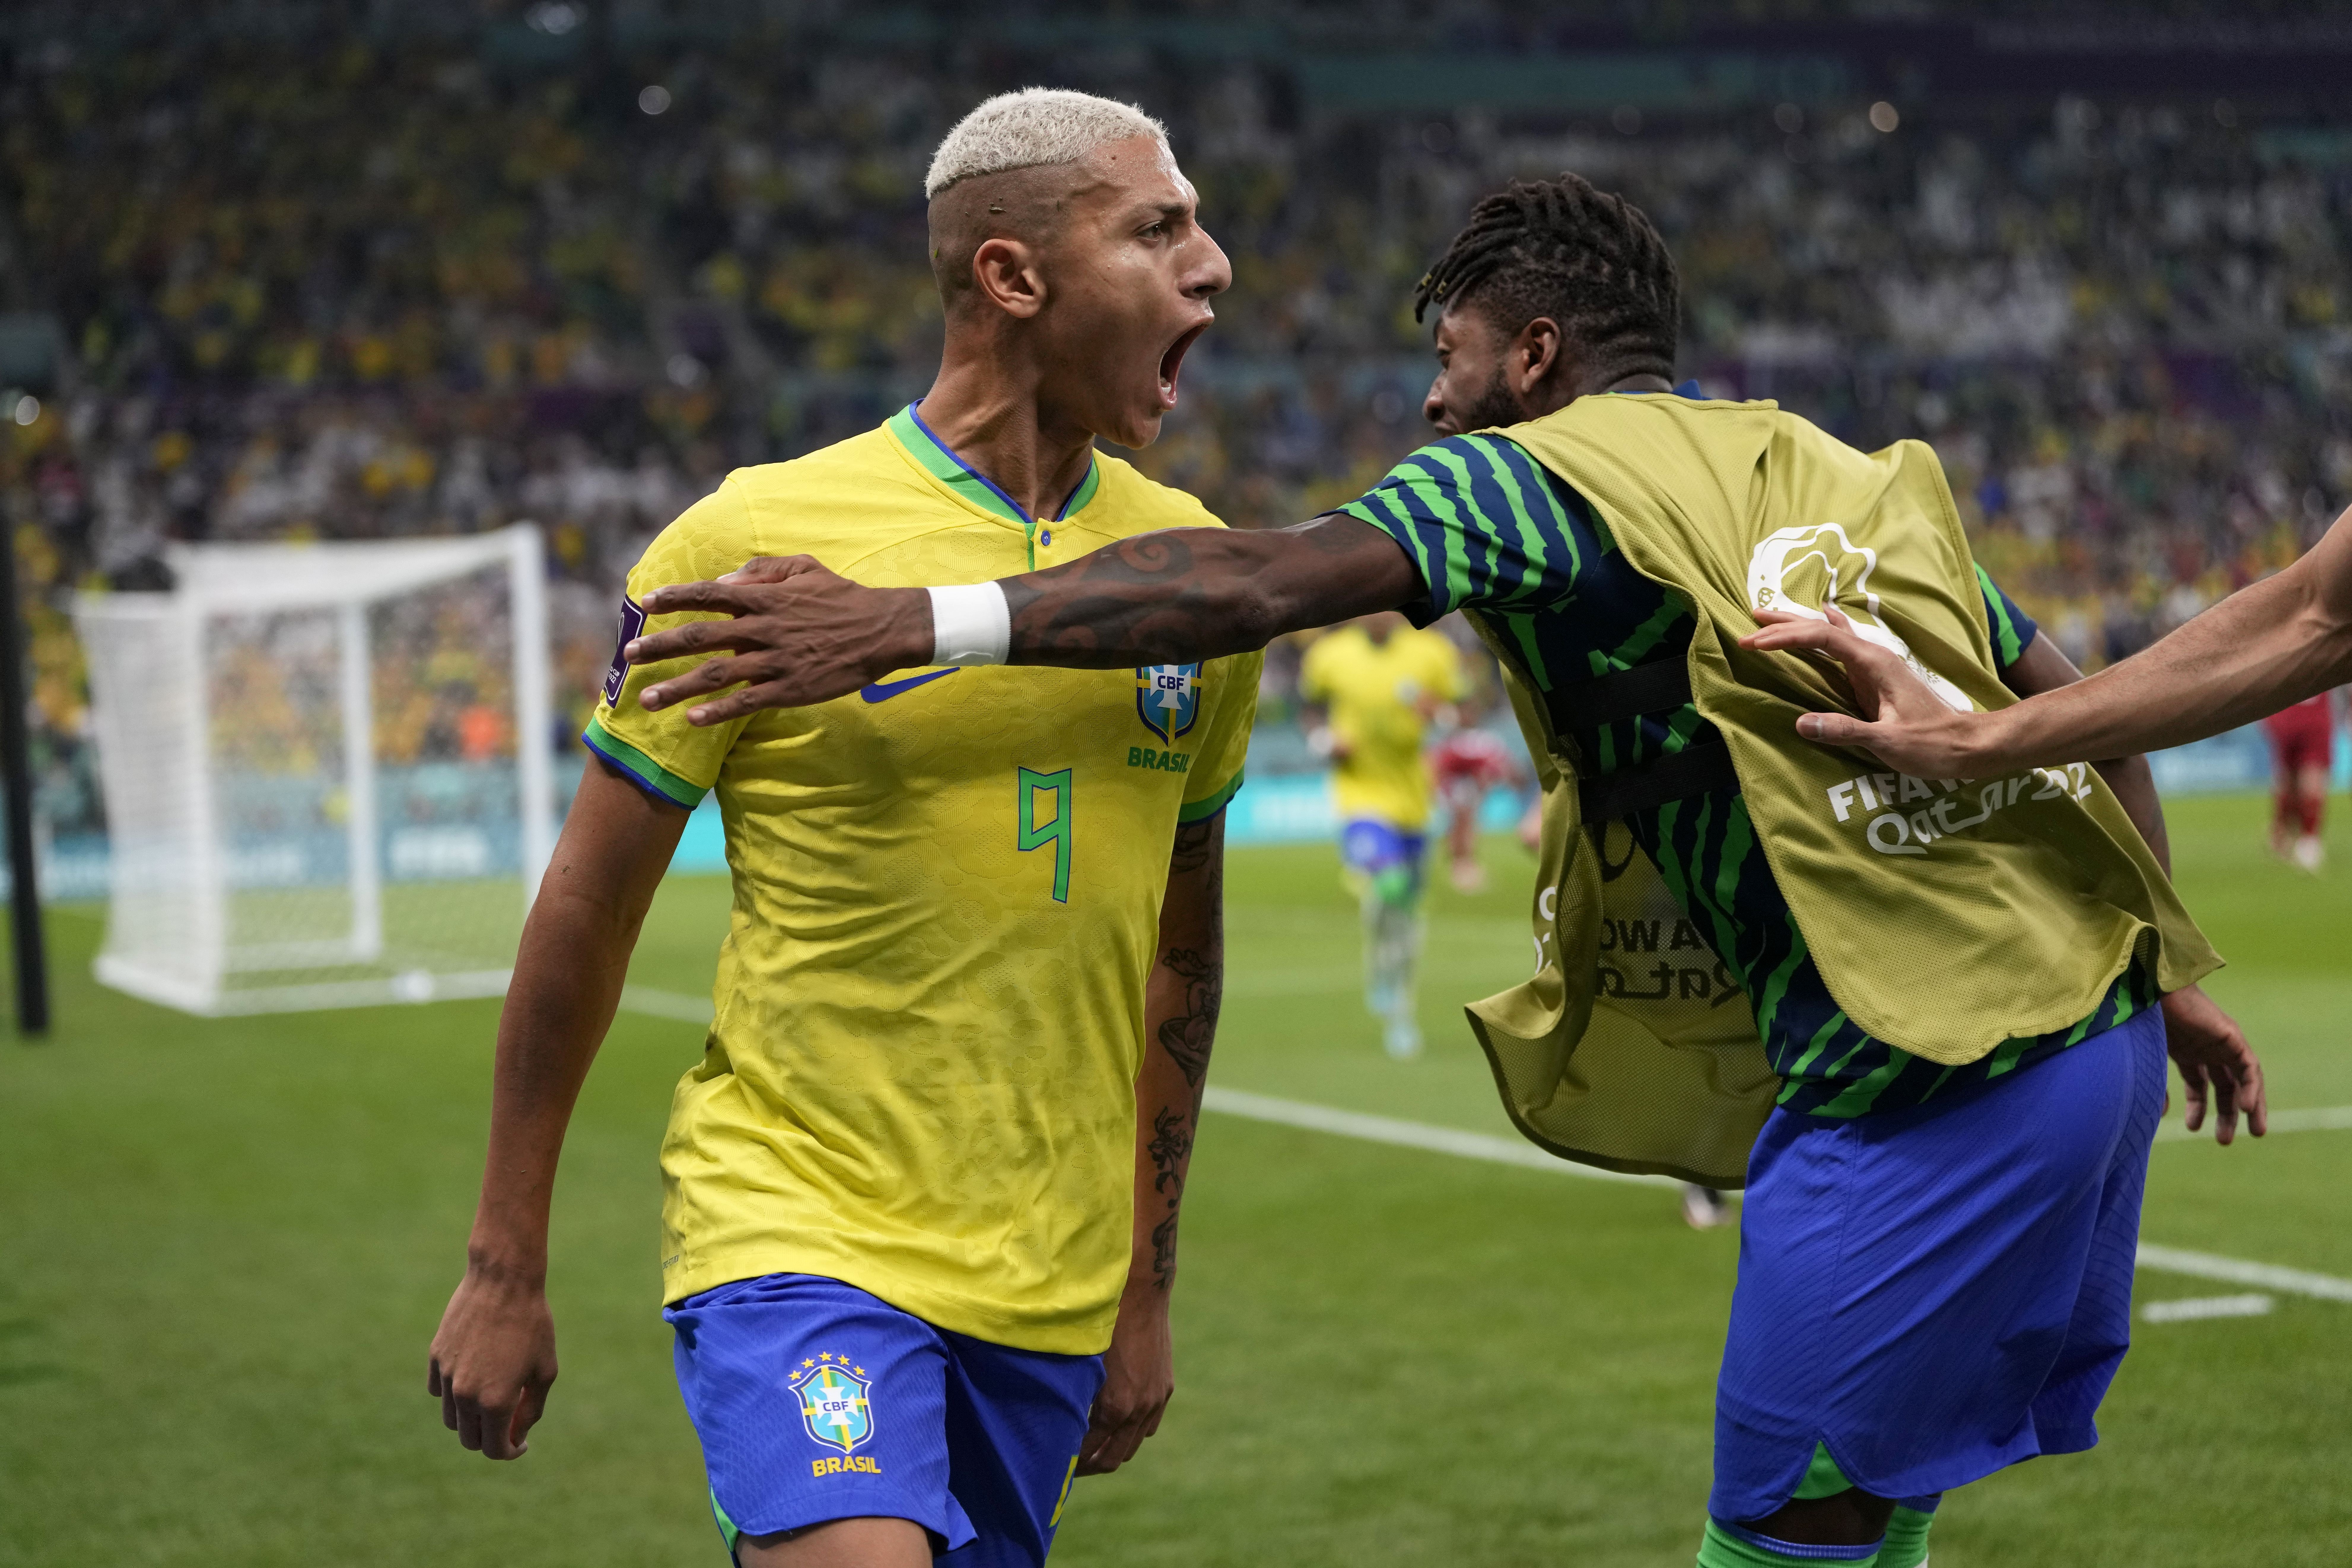 Brazil Road to World Cup 2022 - All Goals 